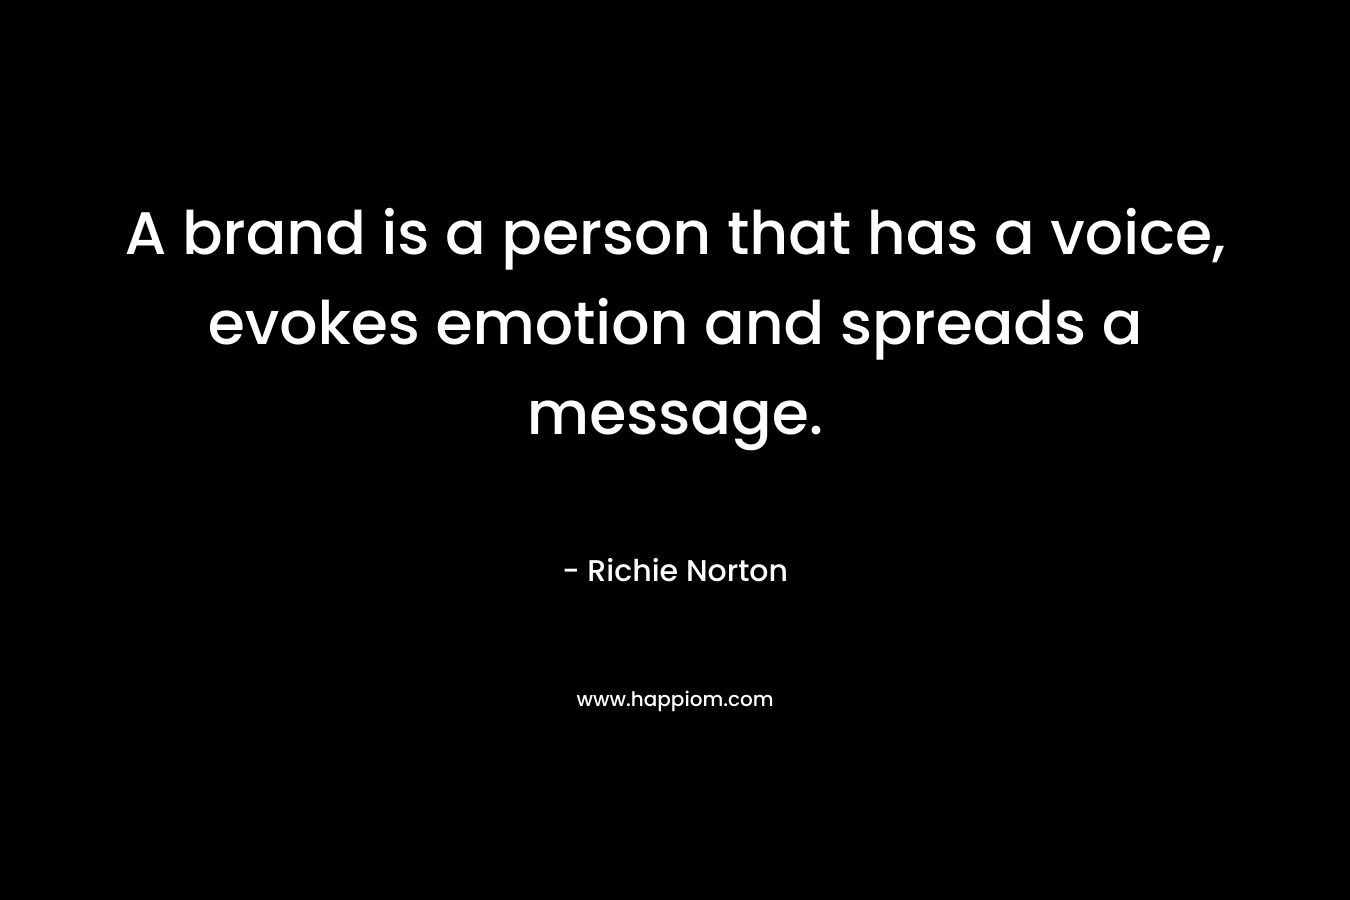 A brand is a person that has a voice, evokes emotion and spreads a message.